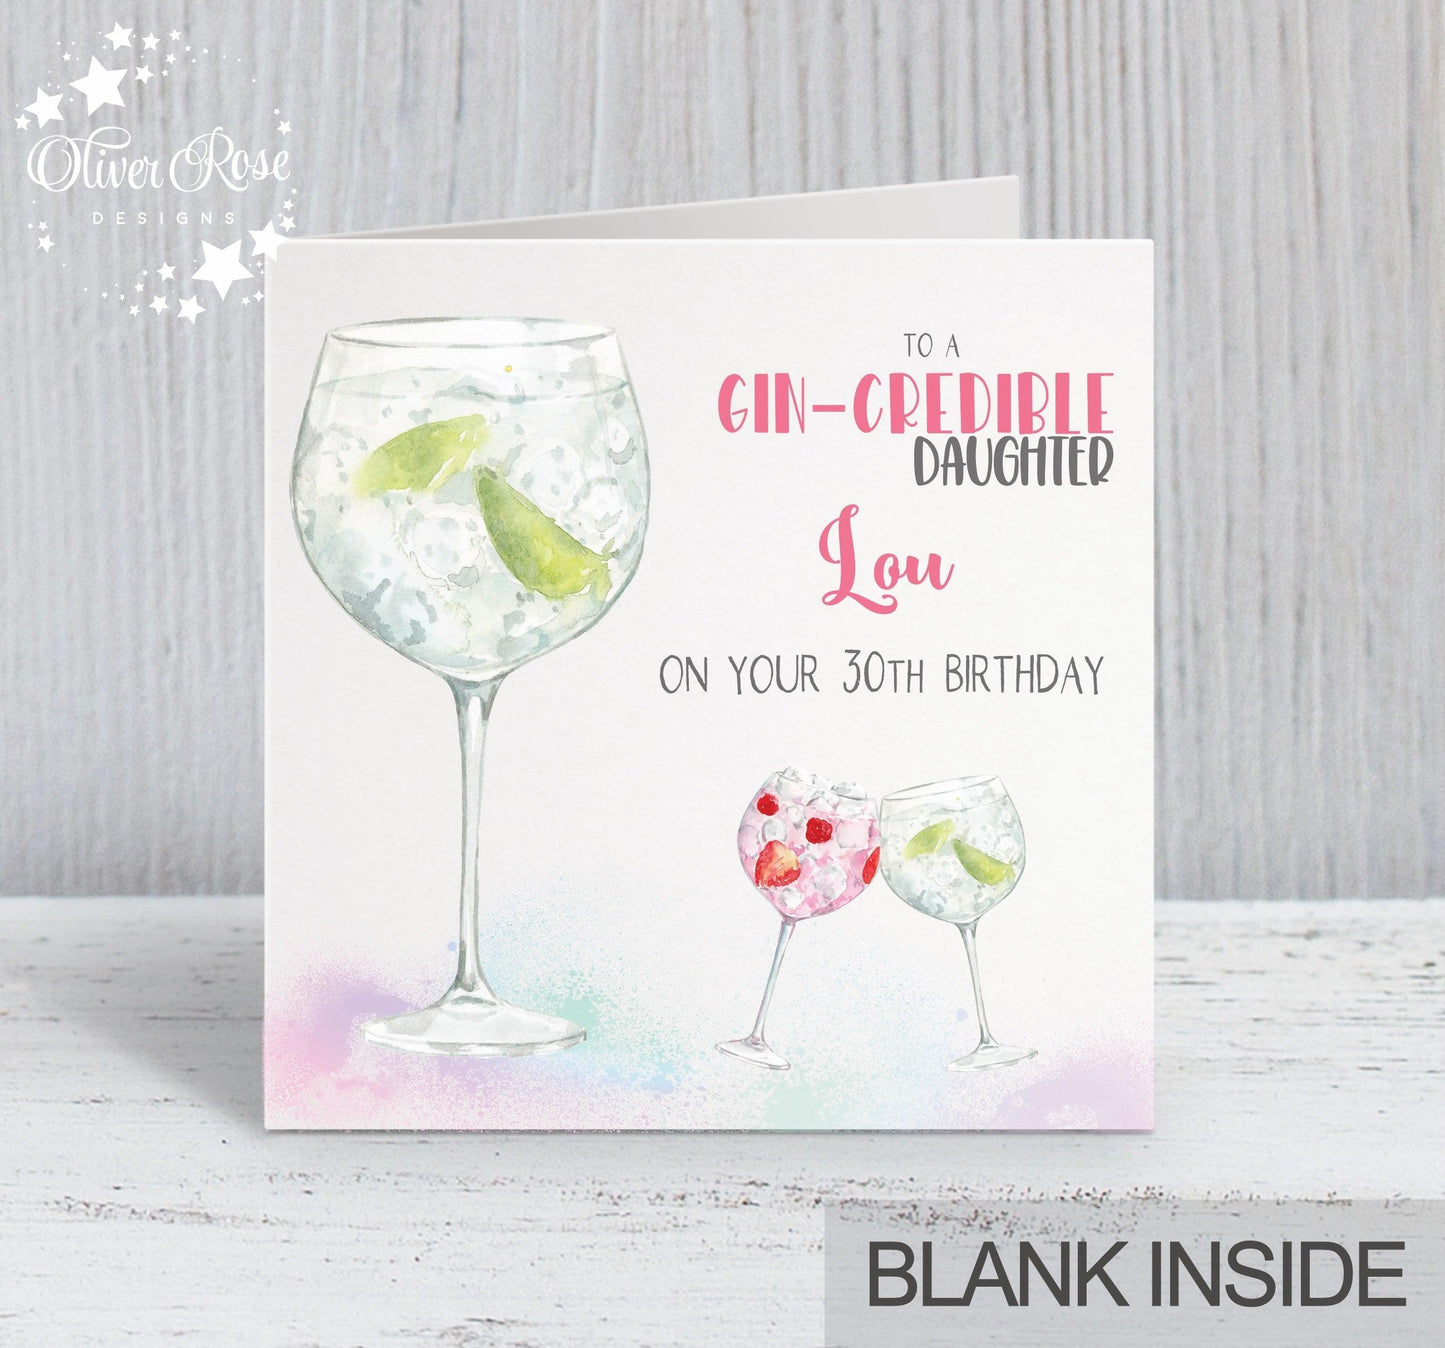 Green Gin Birthday Card (5.75" Square) - Gin-credible - Oliver Rose Designs